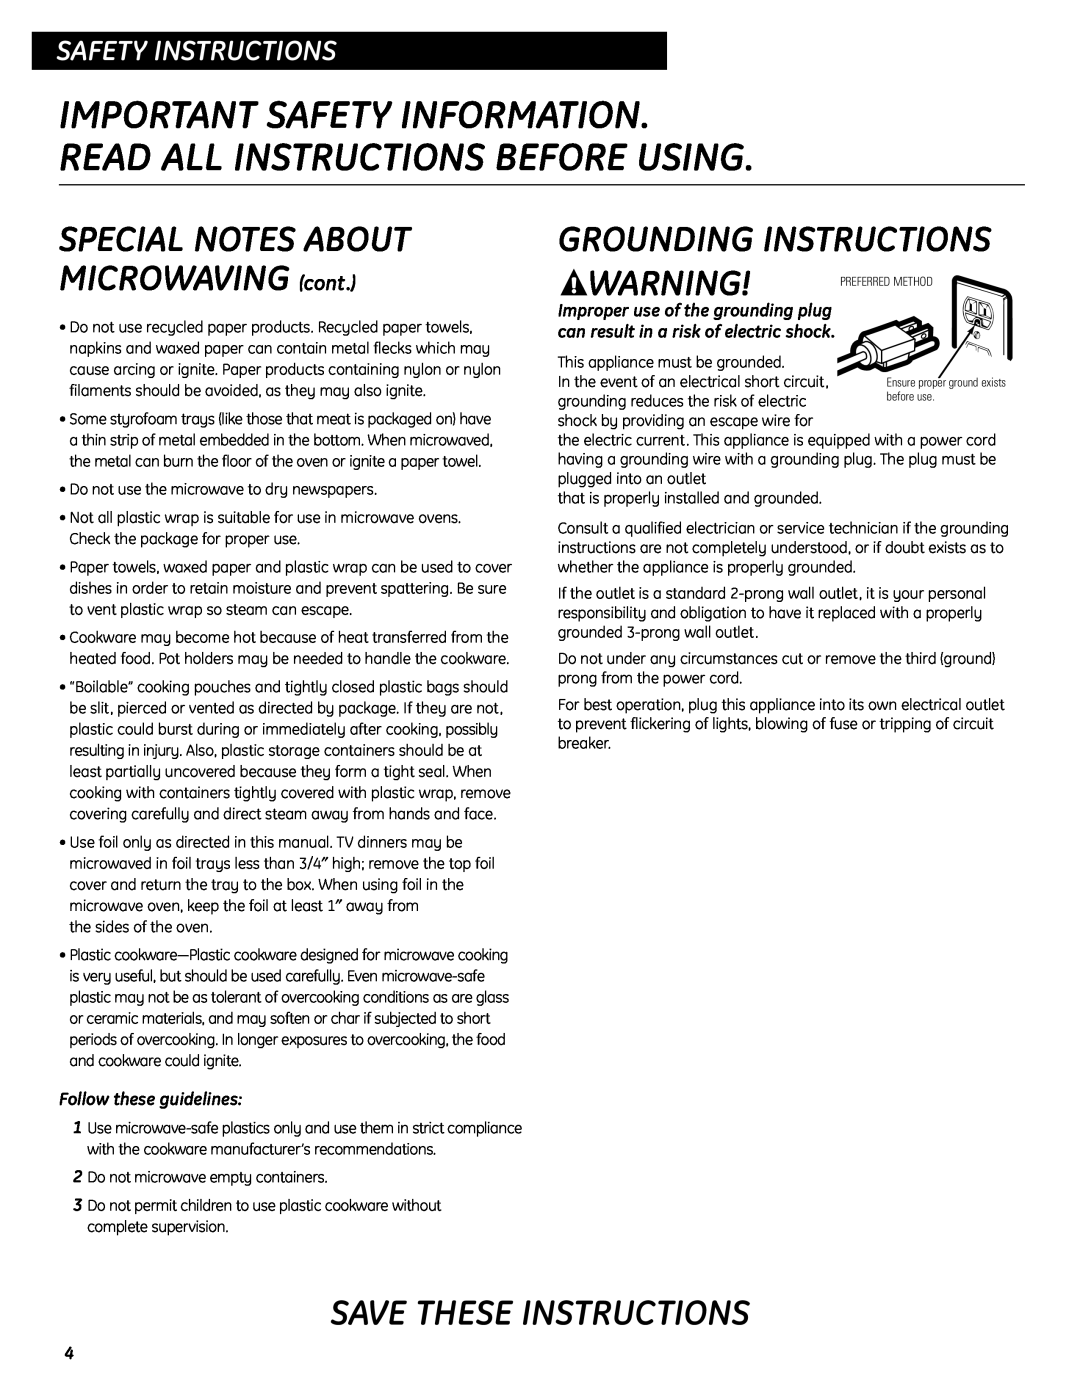 GE JES0737 Grounding Instructions, Save These Instructions, SPECIAL NOTES ABOUT MICROWAVING cont, Safety Instructions 